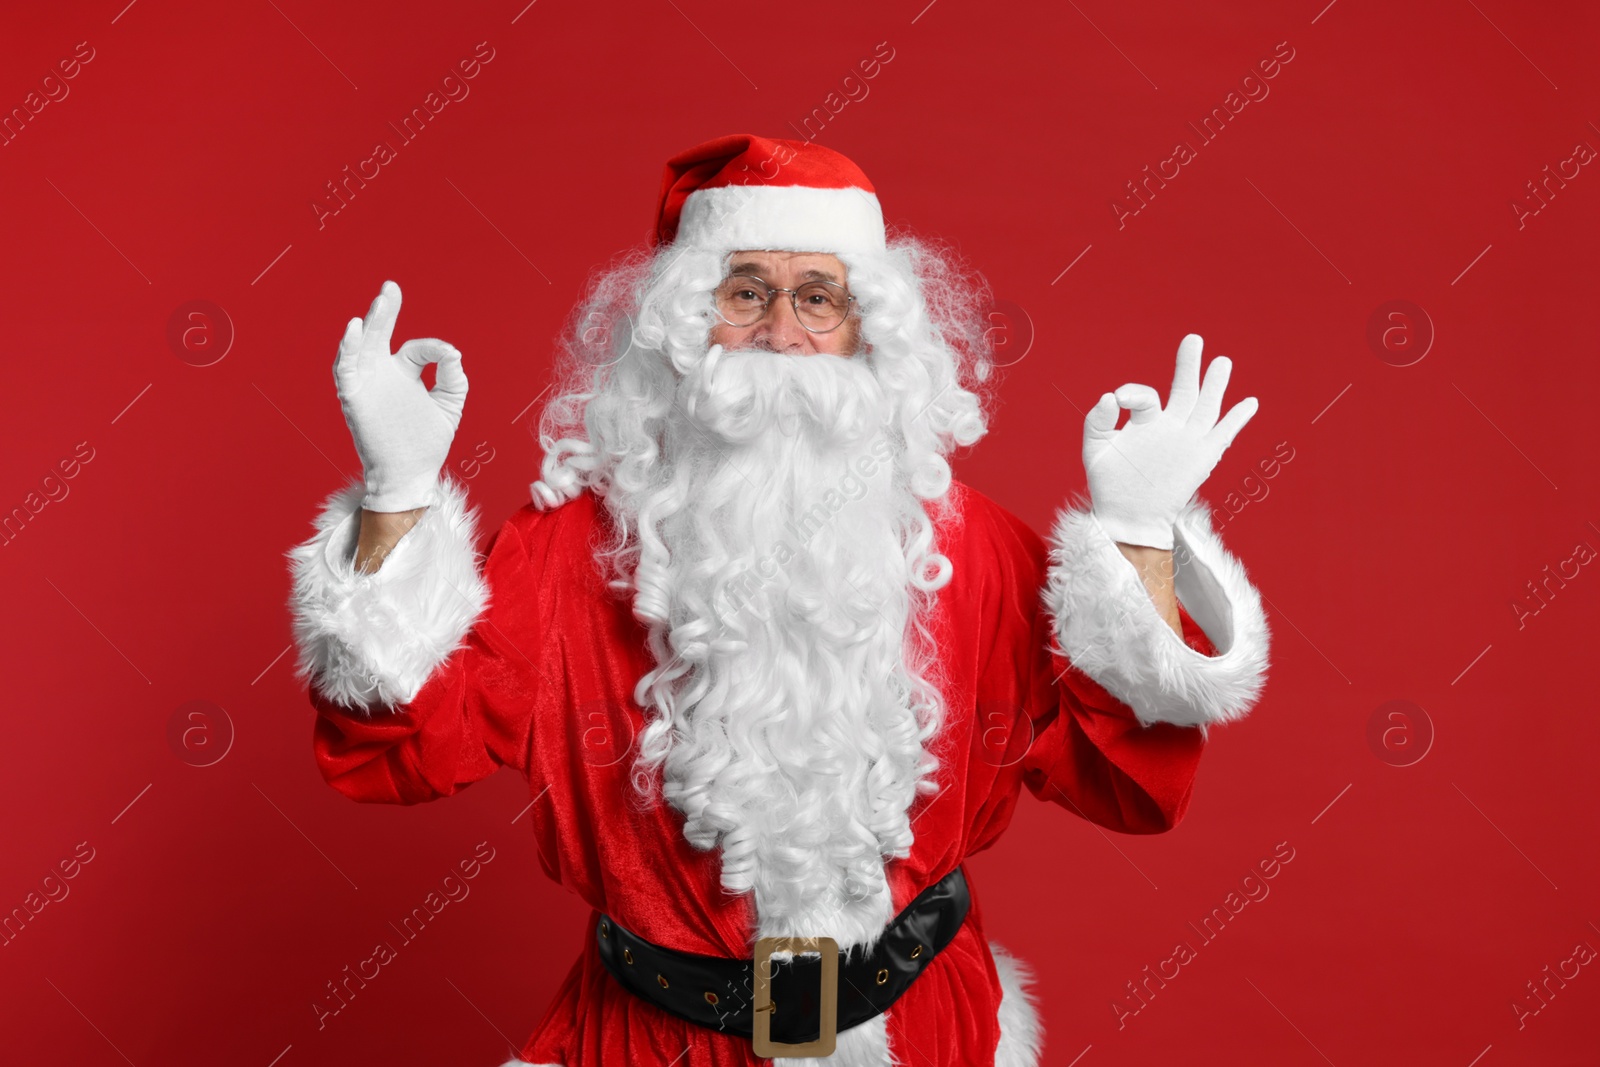 Photo of Merry Christmas. Santa Claus showing OK gestures on red background